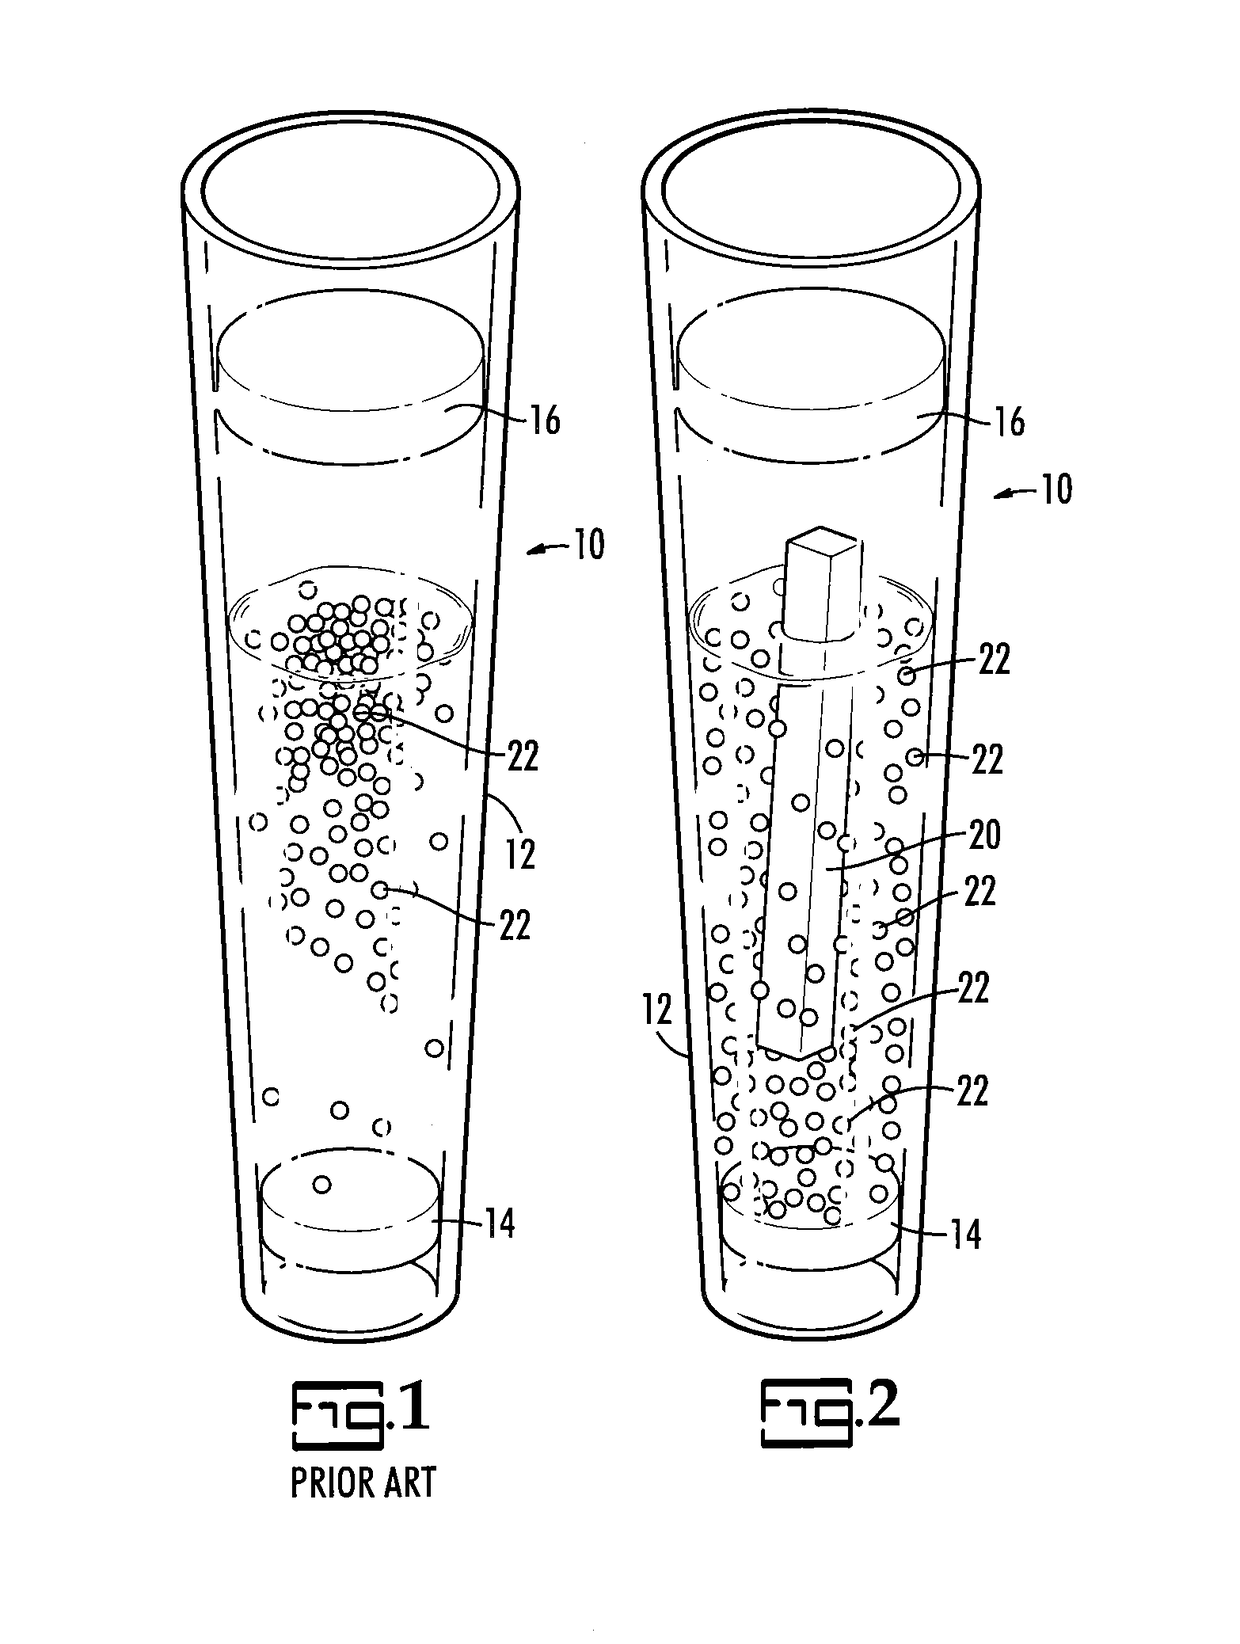 Dispersive pipette extraction tip and methods for use